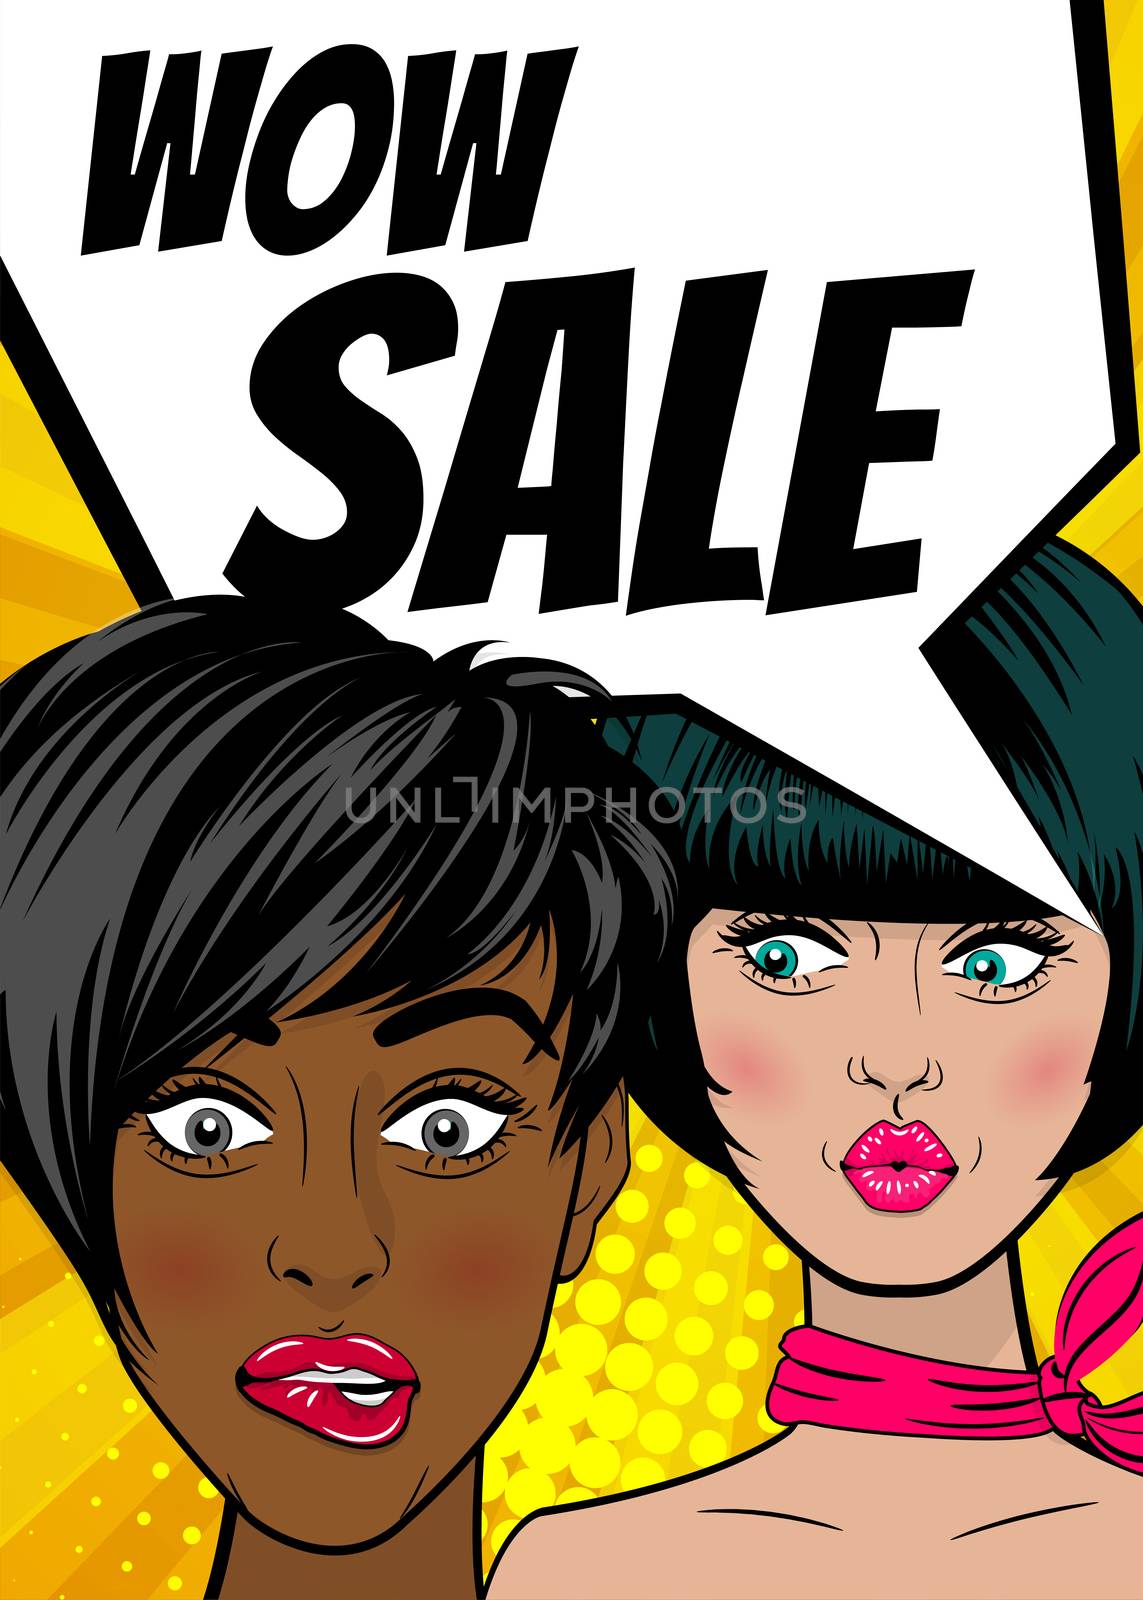 WOW Sale. Pop art two sexy women advertise vintage poster. Comic book text balloon speech bubble. Discount banner vector retro illustration. Girls comic wow face surprised marketing special offer.